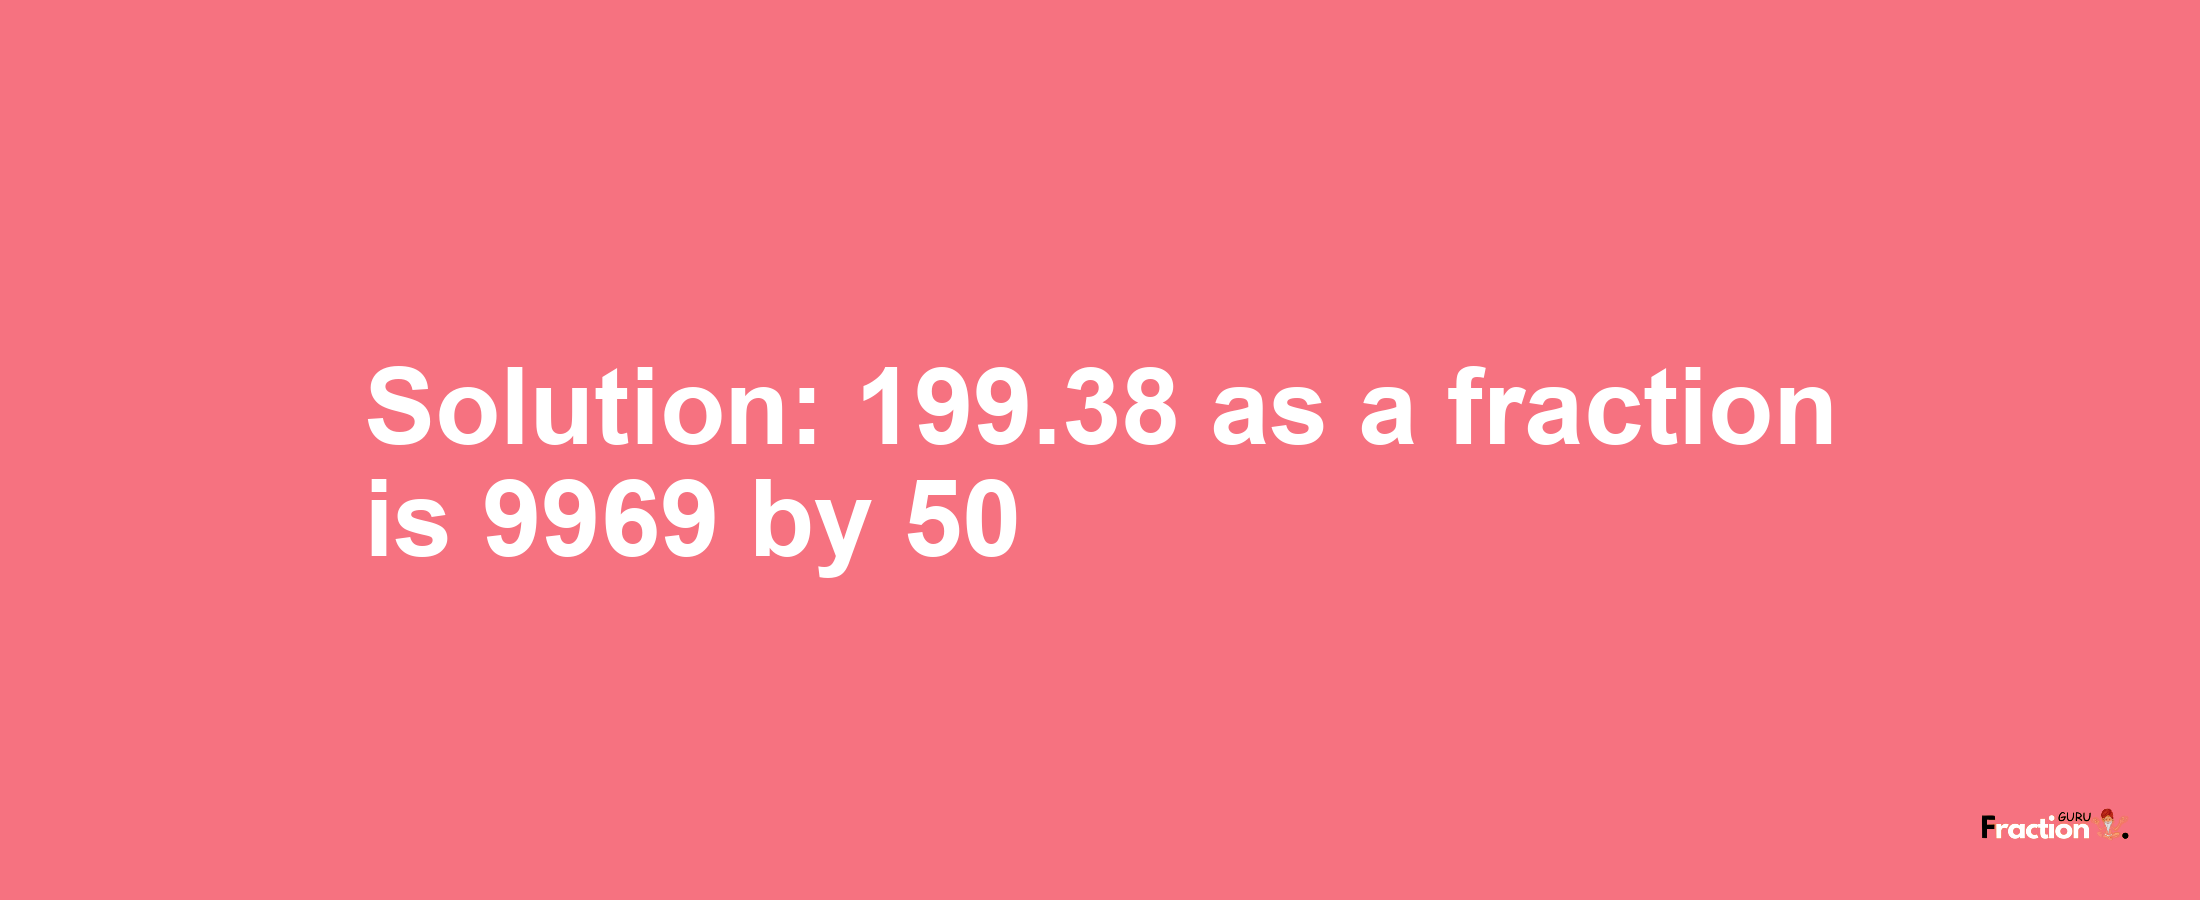 Solution:199.38 as a fraction is 9969/50